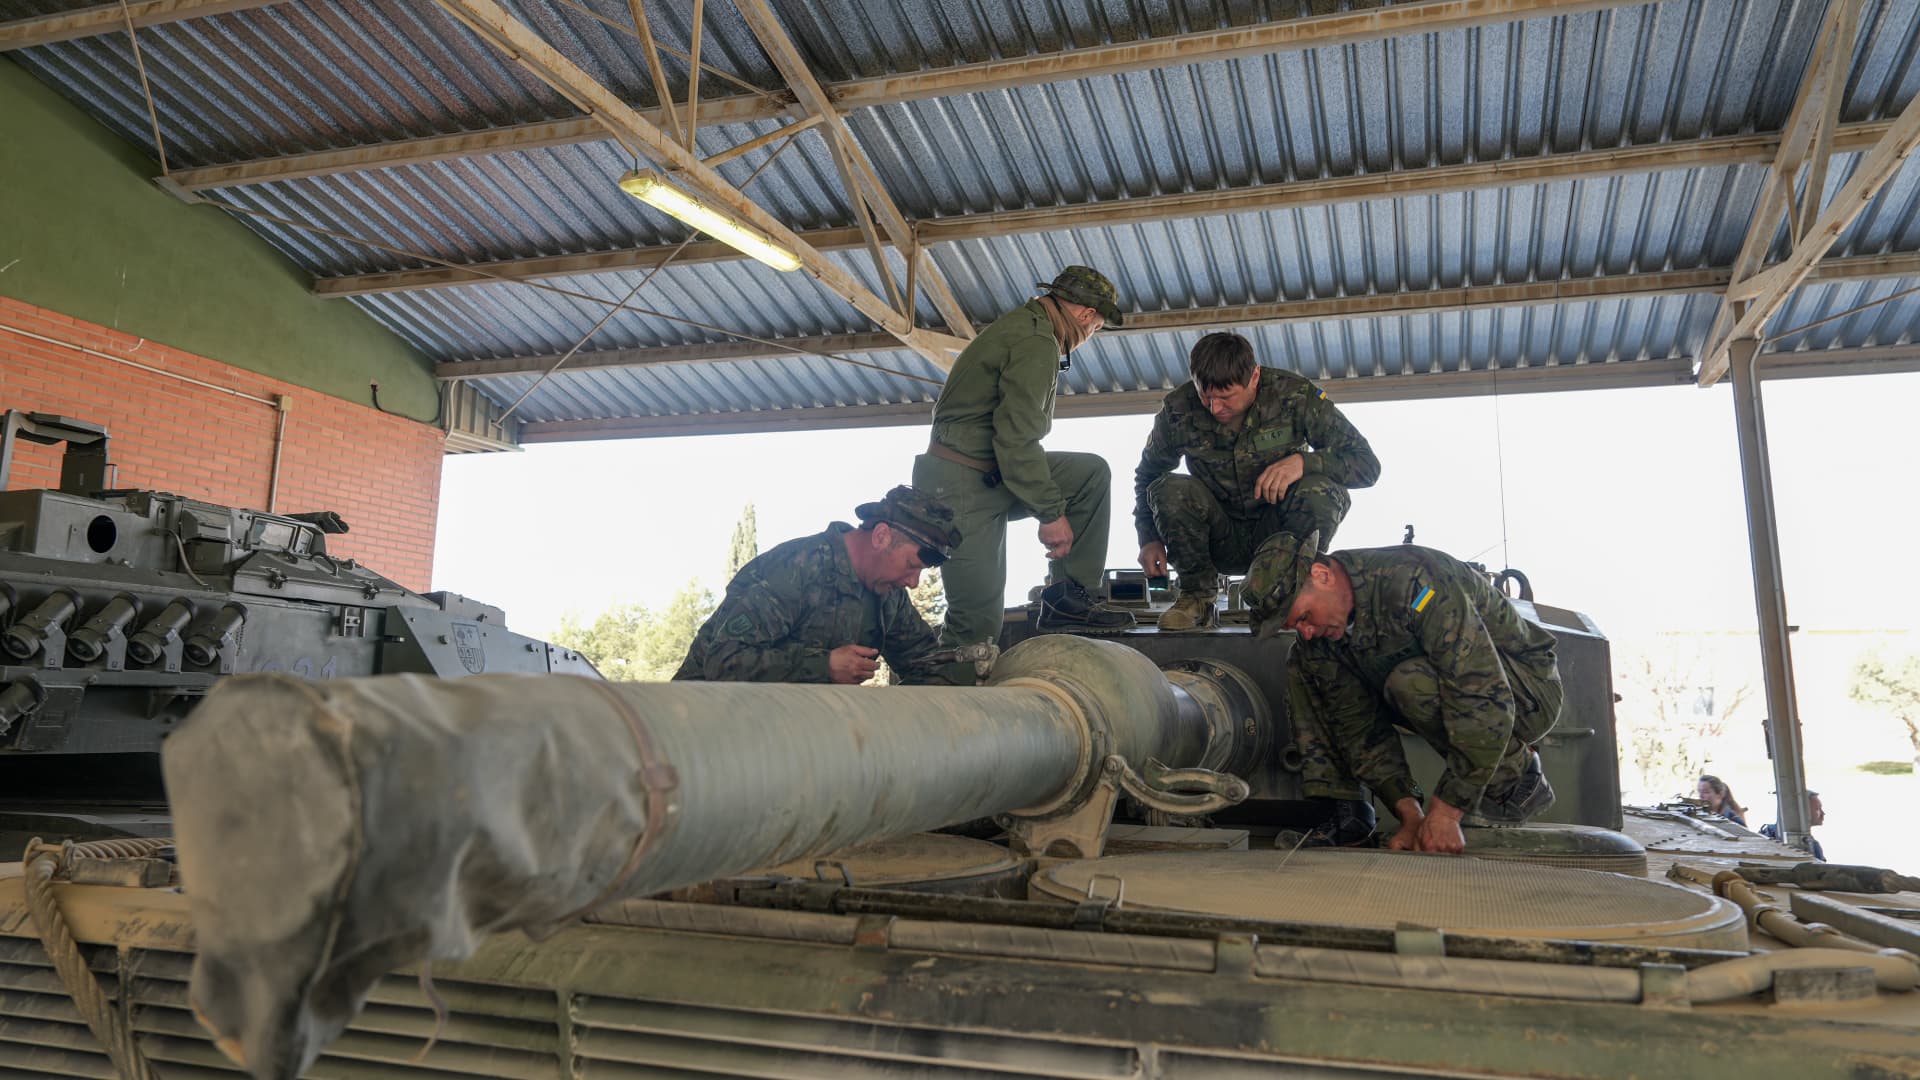 Ukrainian military personnel prepare a Leopard 2A4 tank ahead of a training exercise conducted by the Spanish military, at the San Gregorio military base outside Zaragoza, Spain, on Monday, March 13, 2023. 